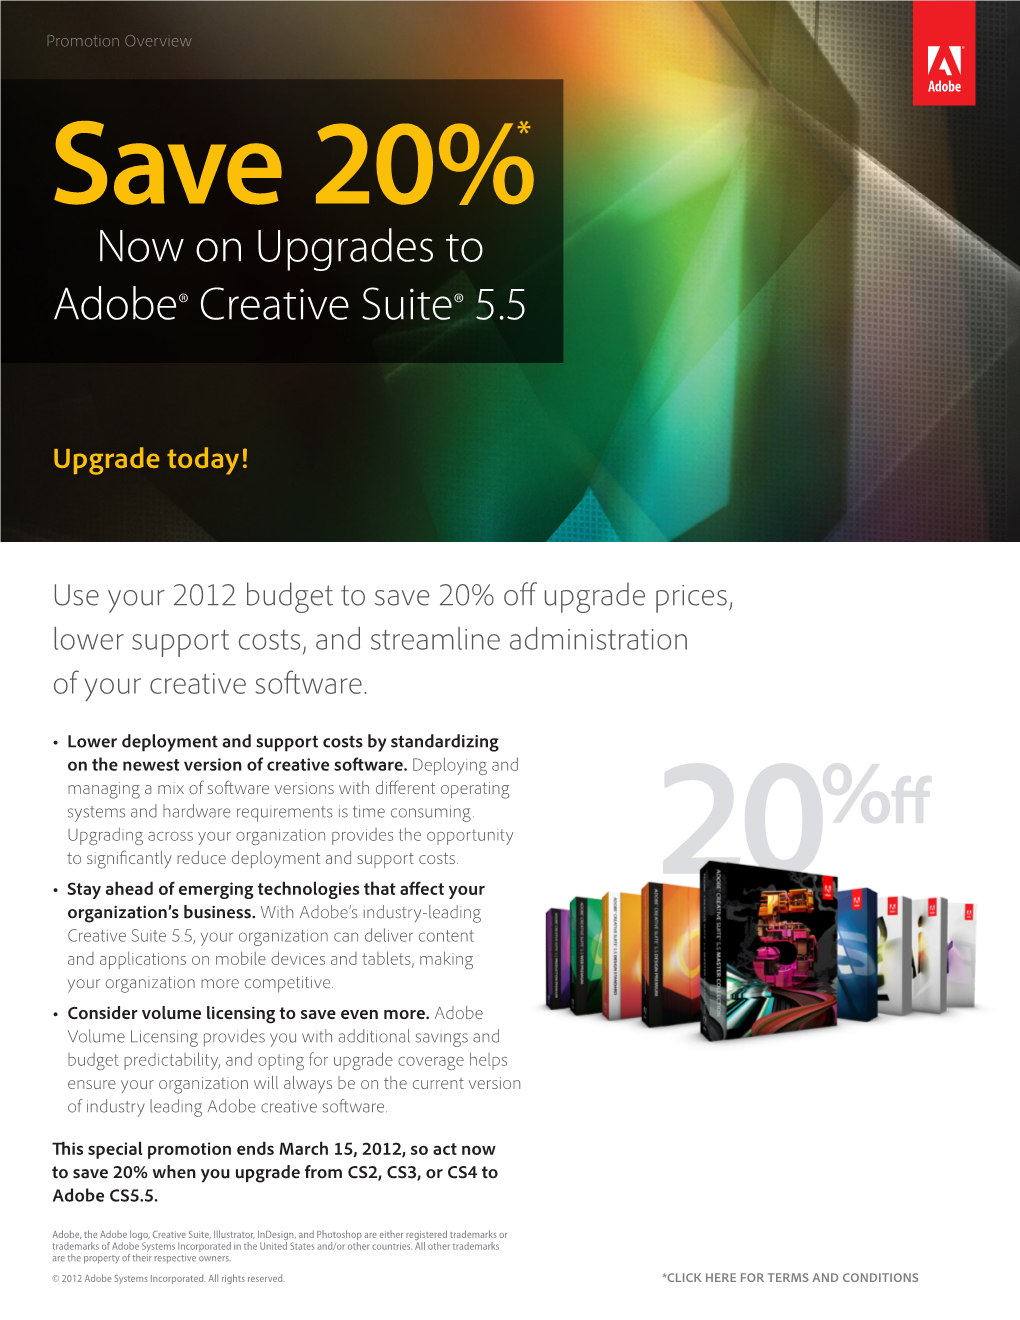 Now on Upgrades to Adobe® Creative Suite® 5.5